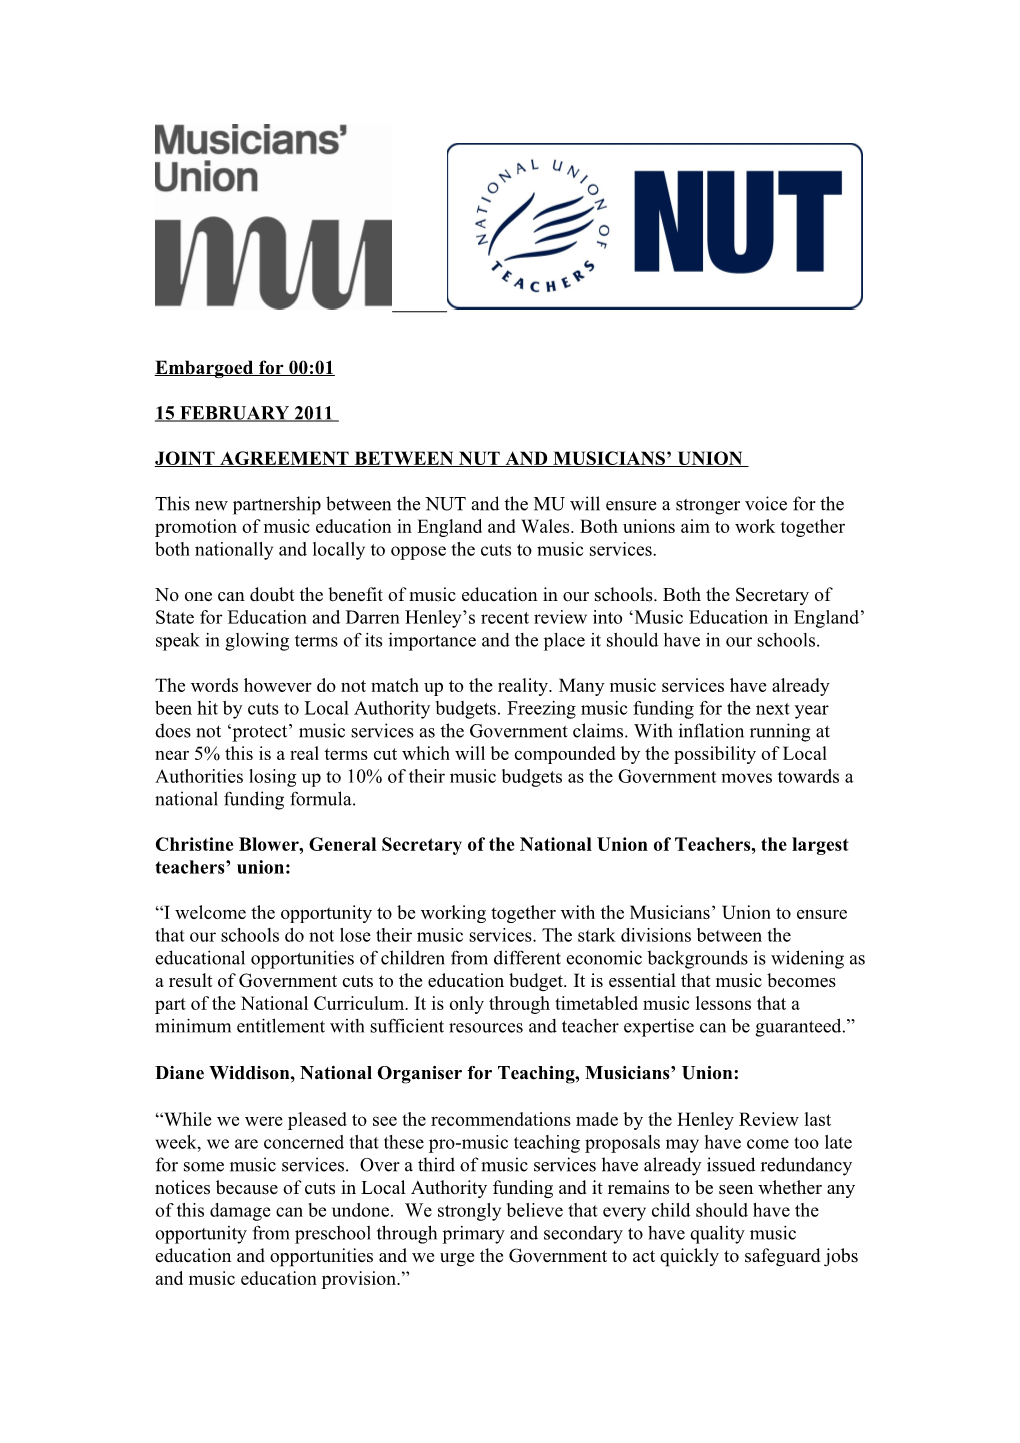 Joint Agreement Between Nut and Musicians Union